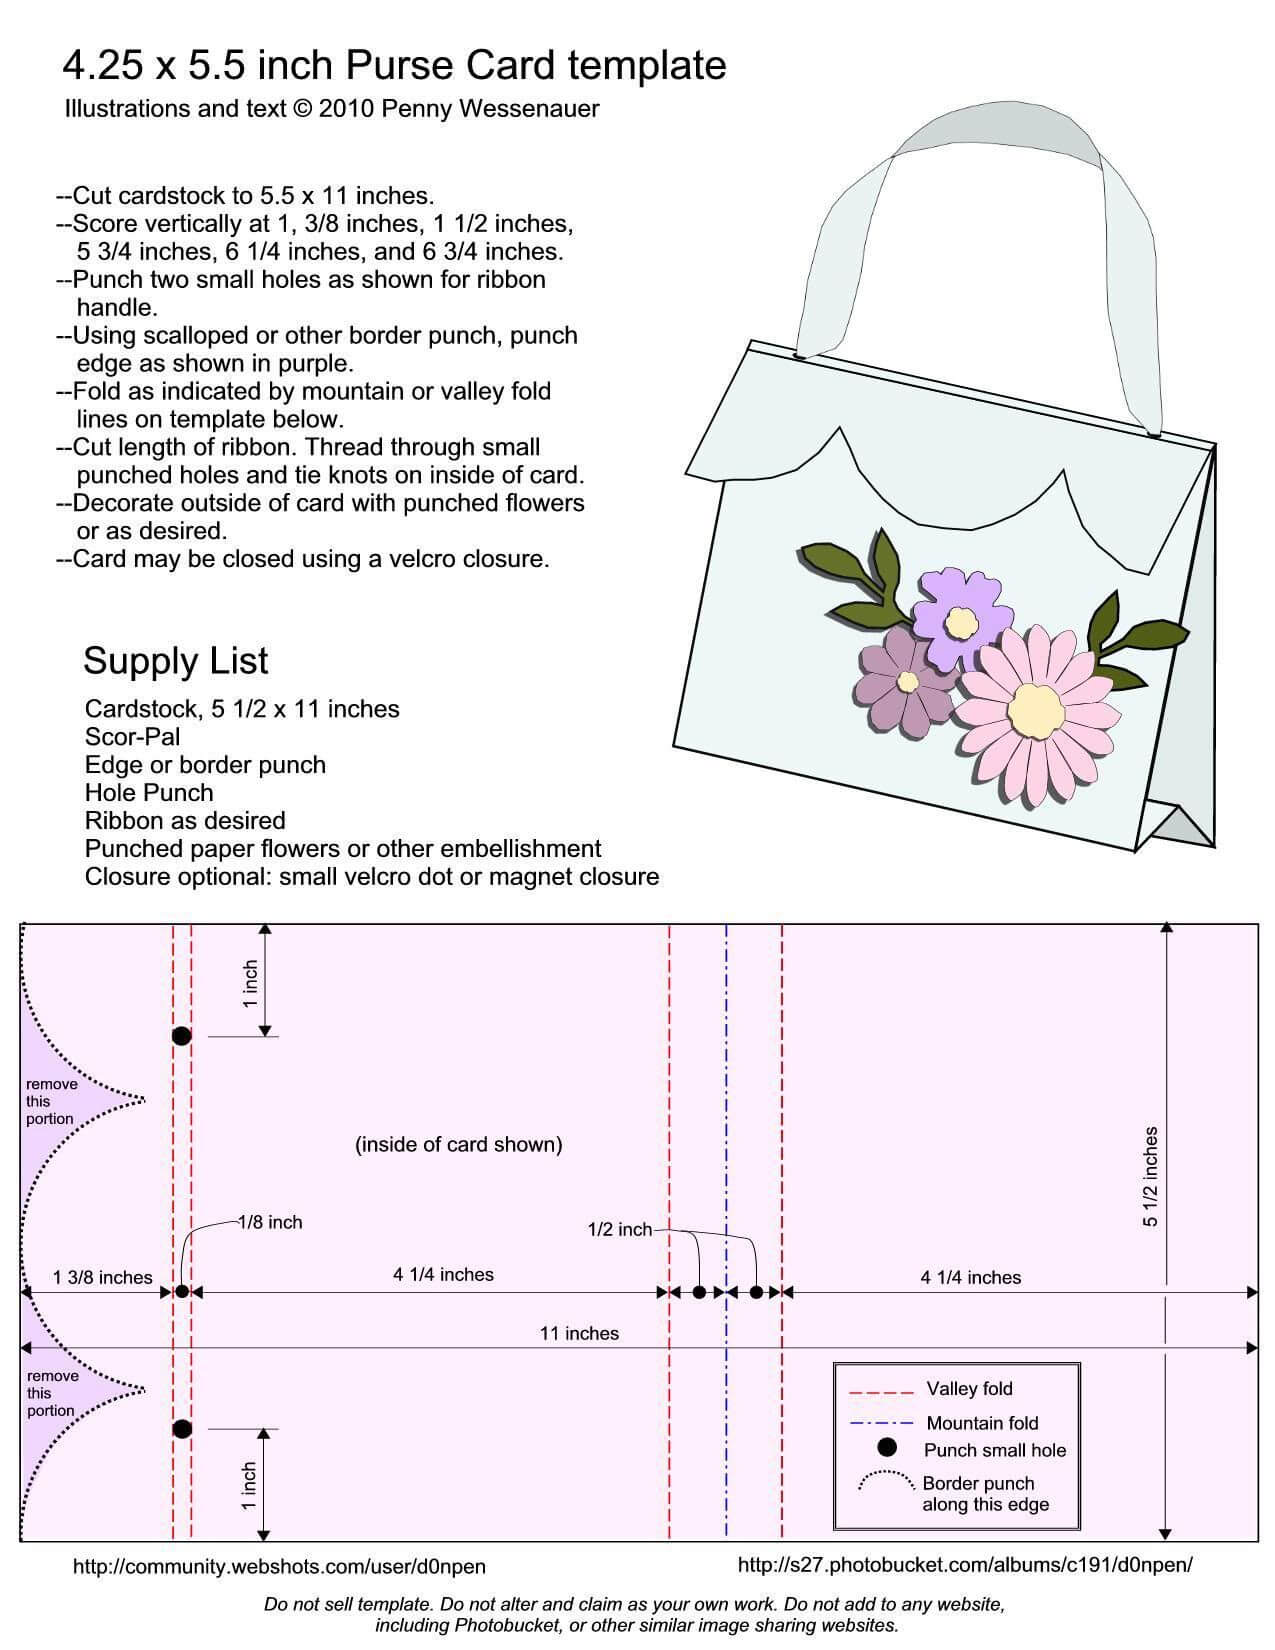 Purse Card Template – Size A2 ( 4.25 X 5.5) | Step Cards Intended For A2 Card Template